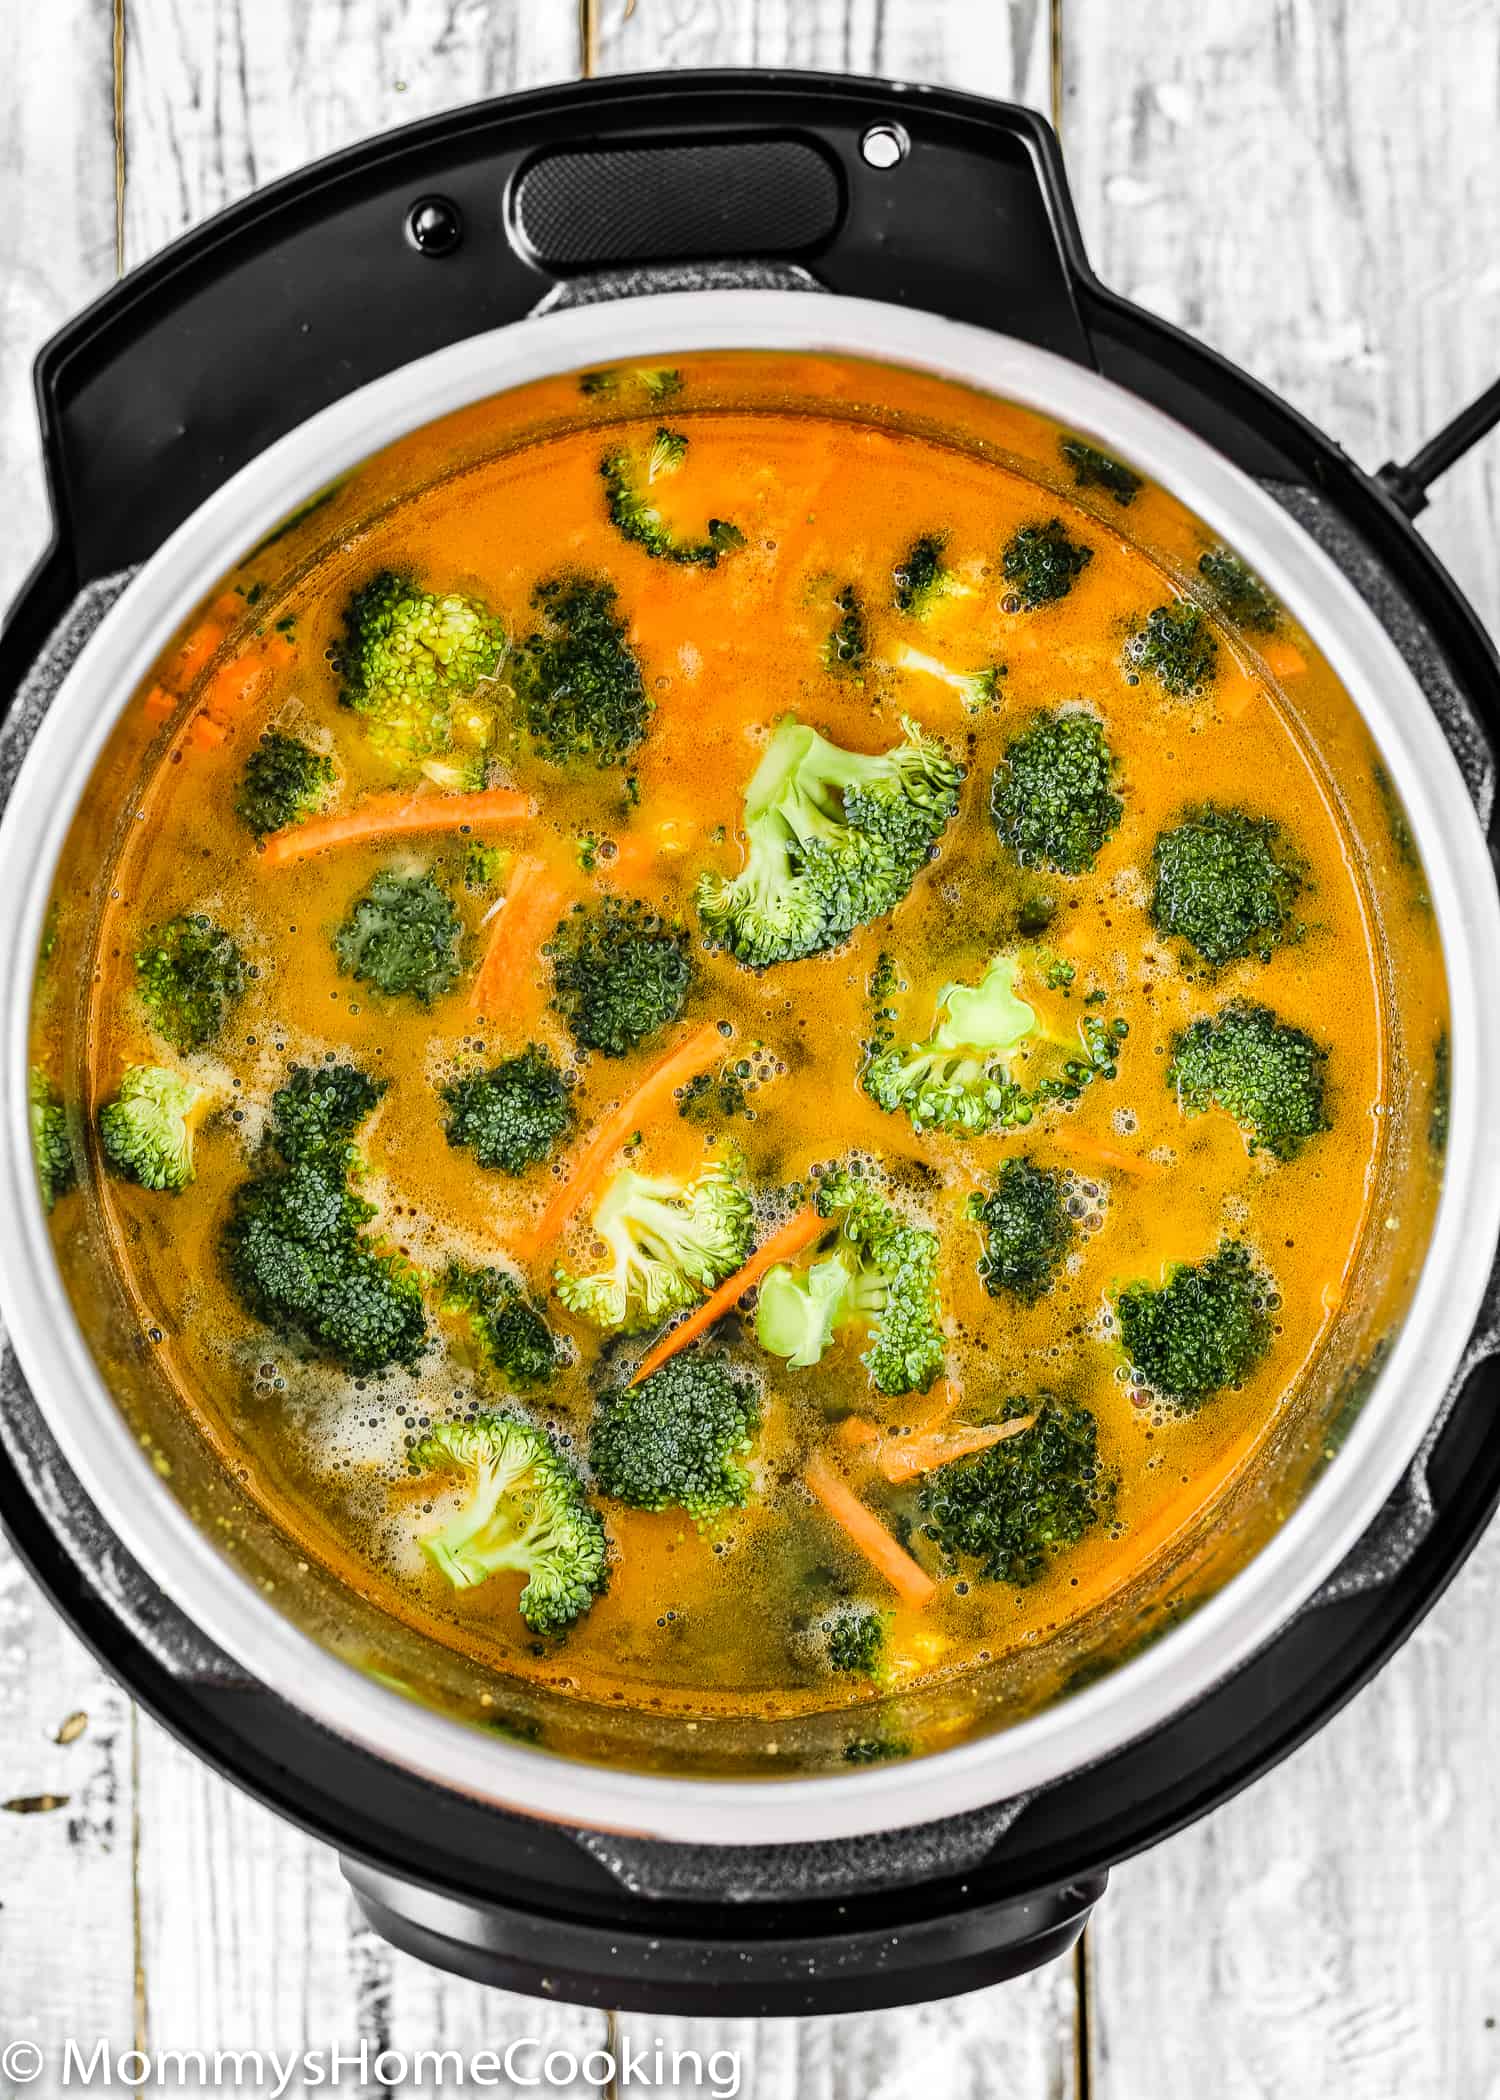 Broccoli Cheddar Cheese Soup Recipe in a instant pot